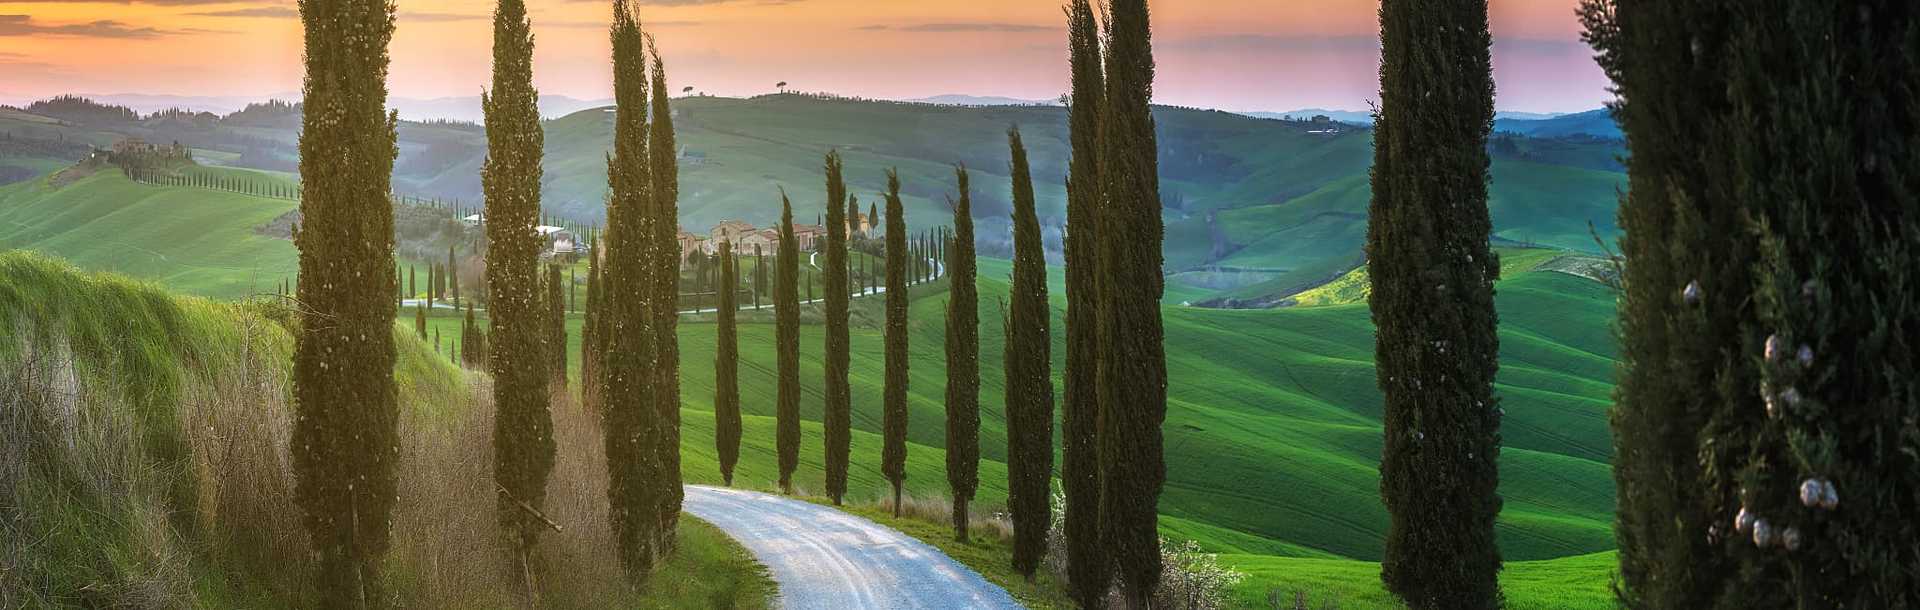 Cypress tree lined, winding road through the hills of Tuscany, Italy.